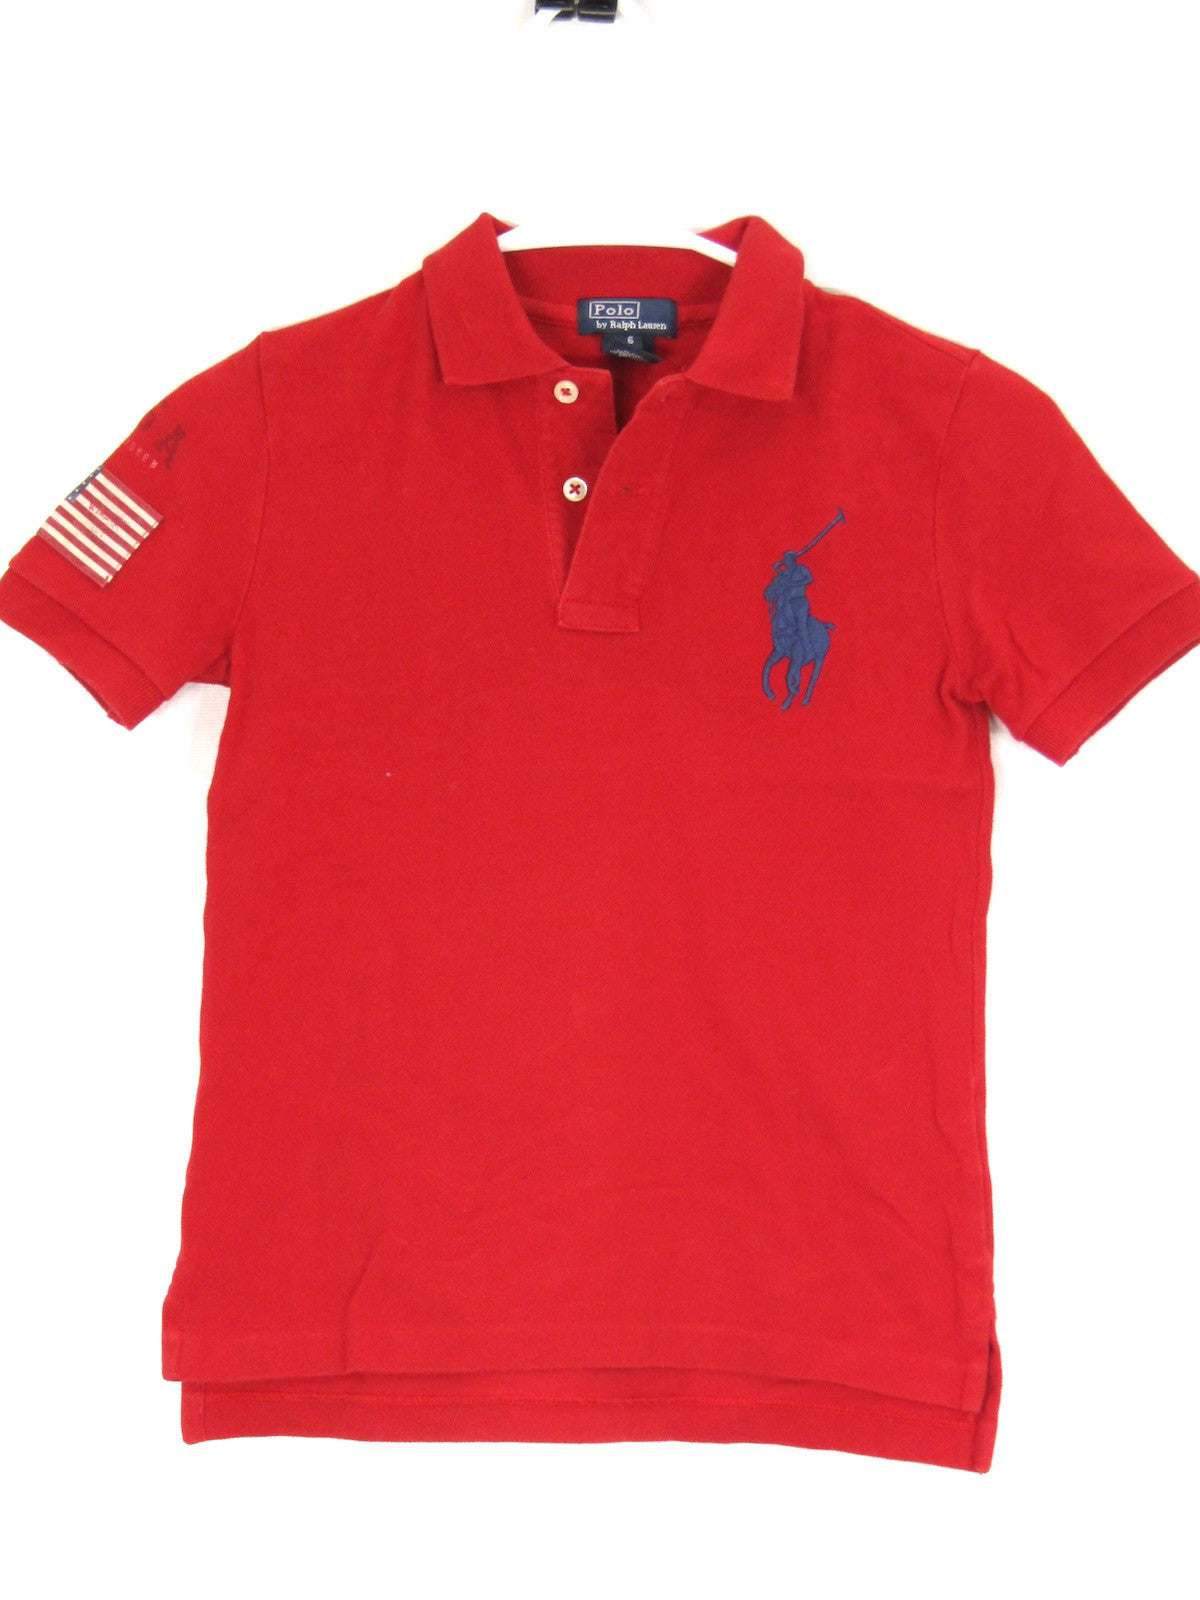 white ralph lauren polo shirt with red horse